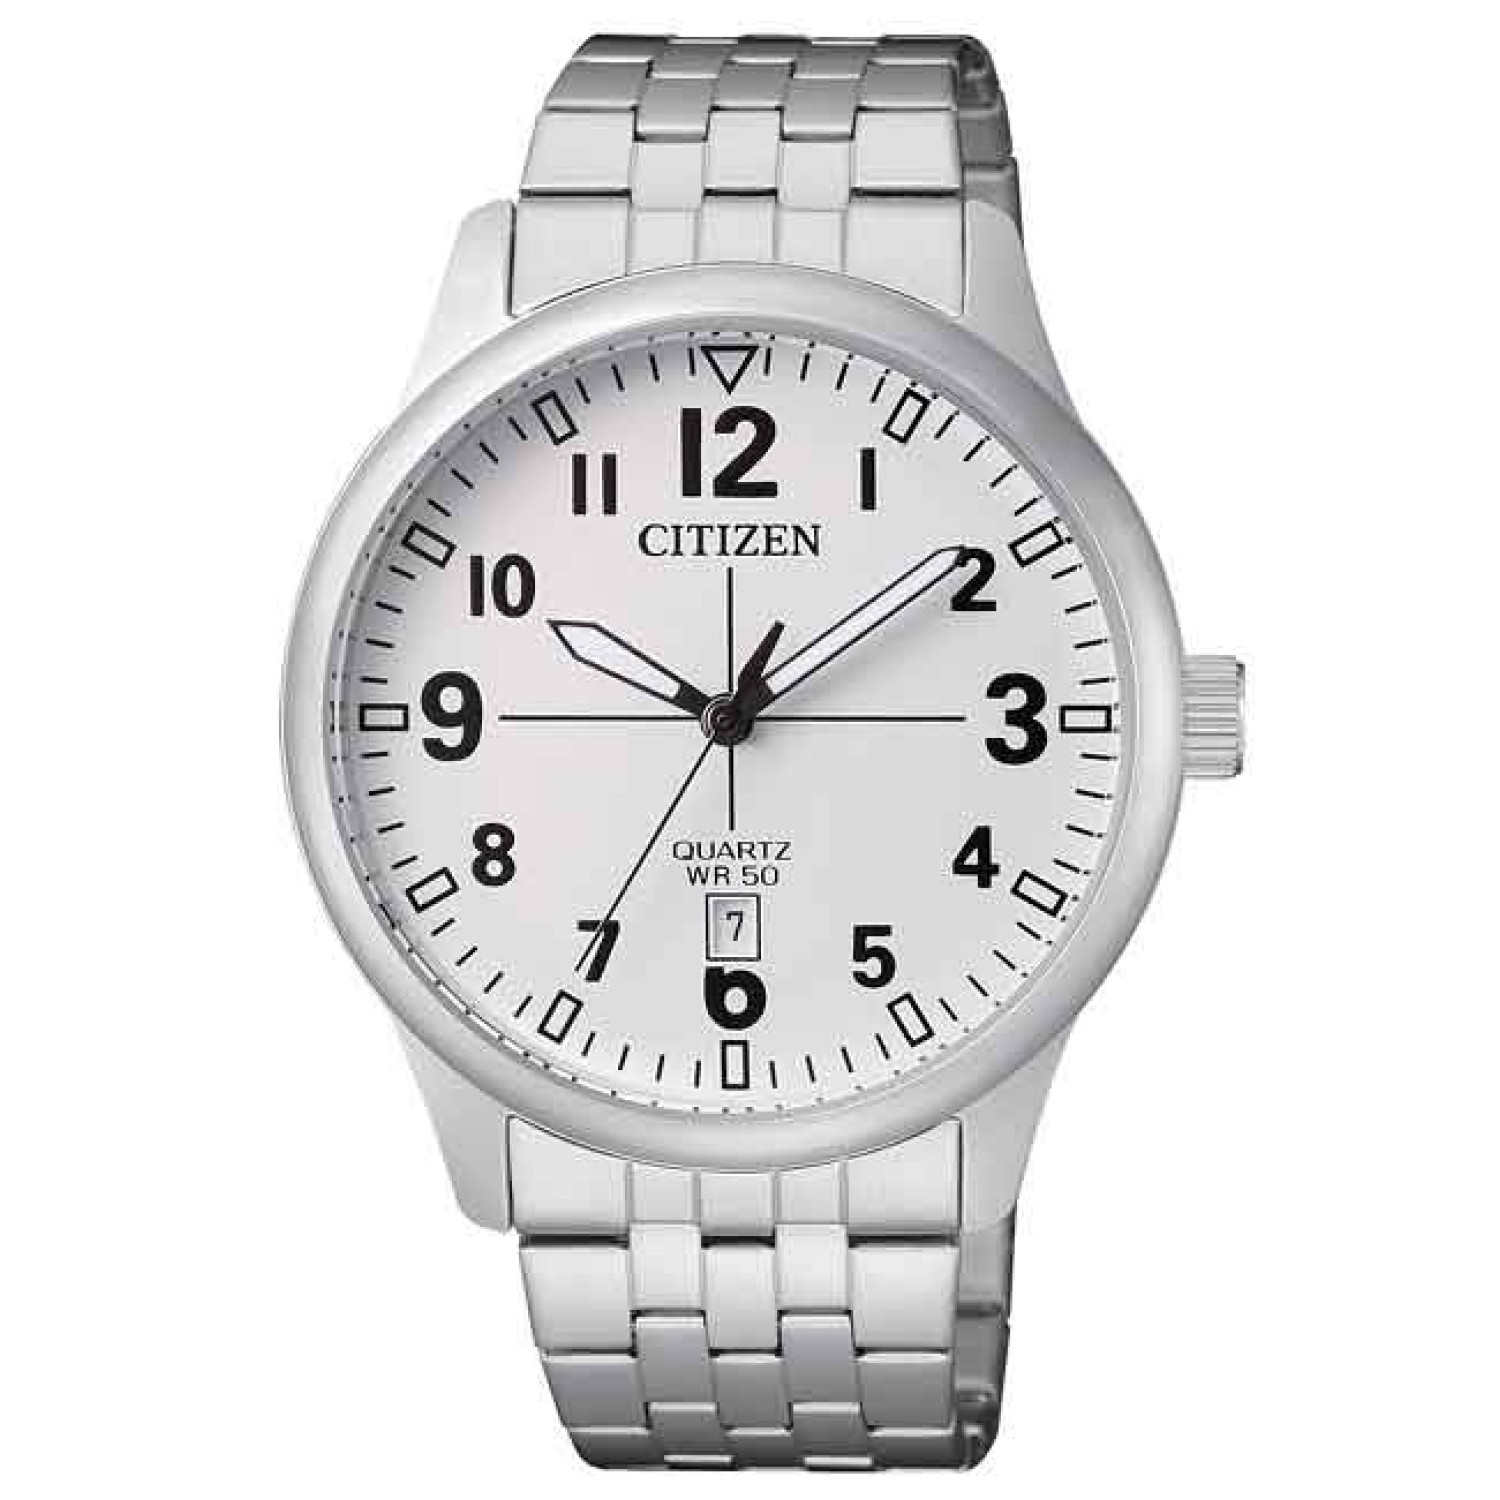 BI1050-81B Citizen Mens Silver Stainless Steel Quartz Date Watch. With a stainless steel construction and push button buckle, it is both hard-wearing and convenient.